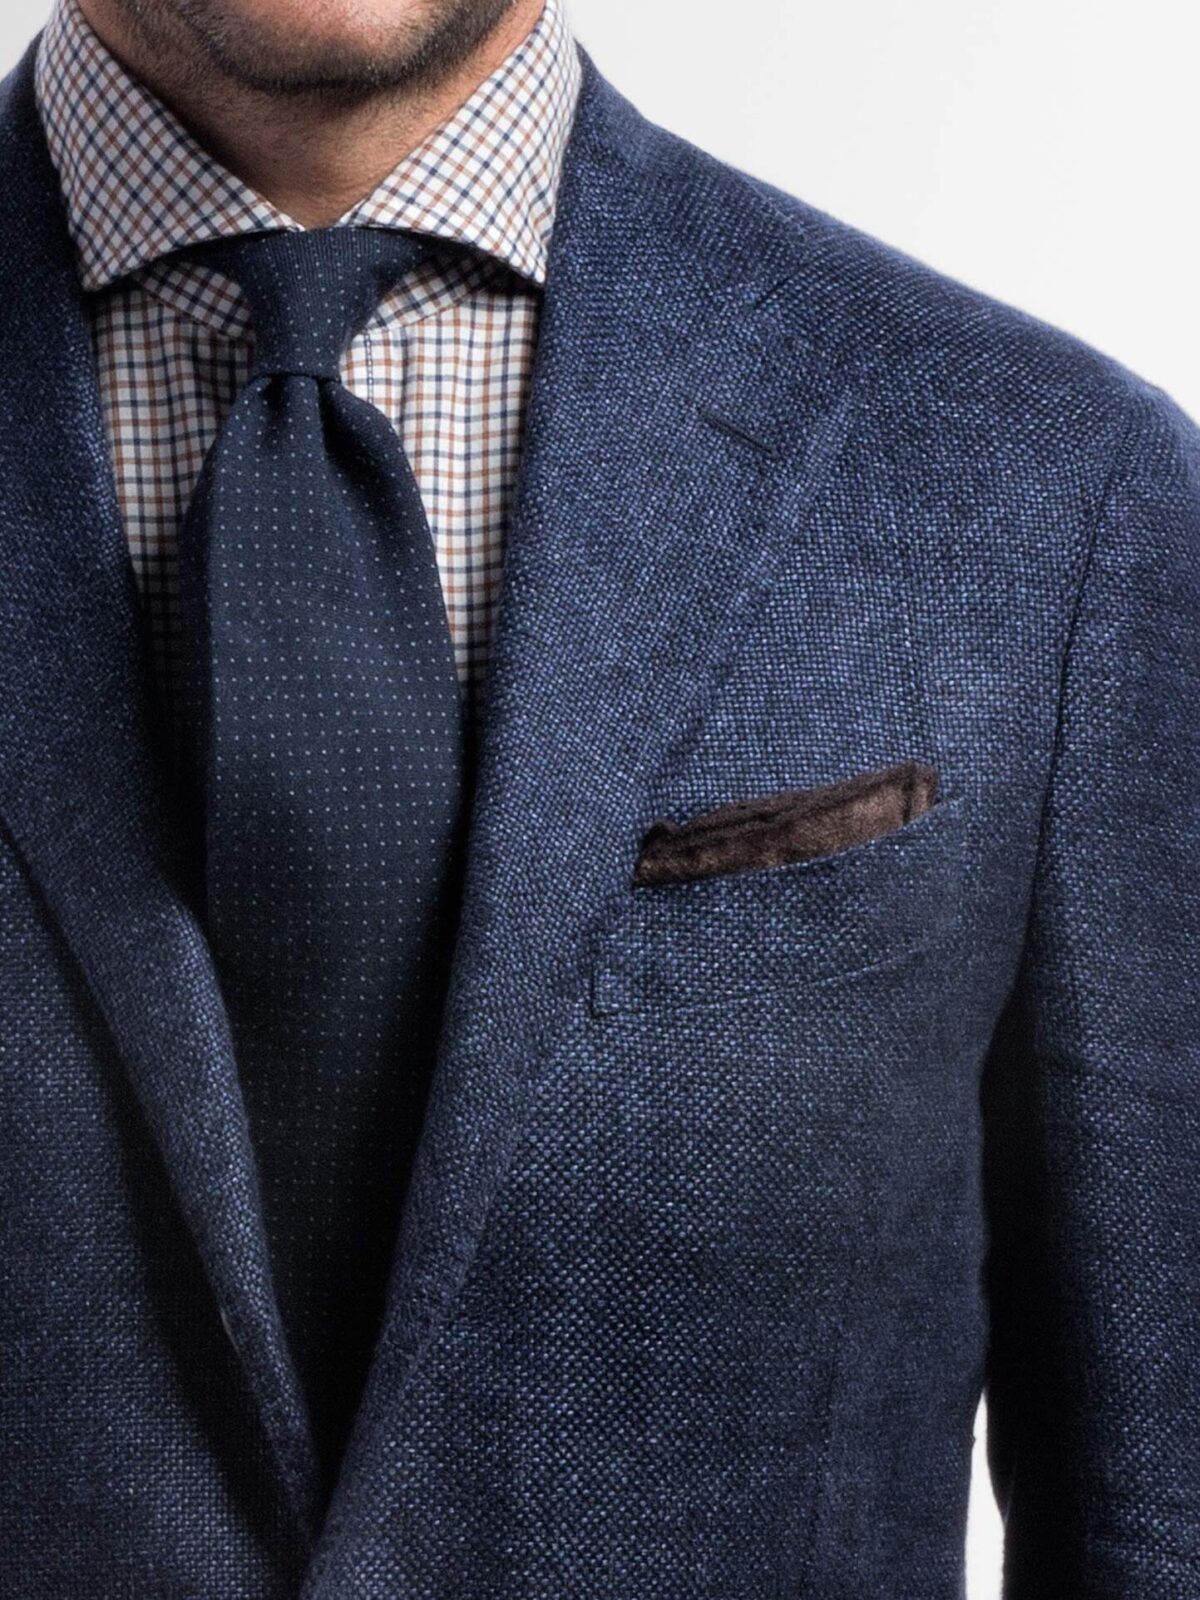 Chestnut Wool Pocket Square by Proper Cloth